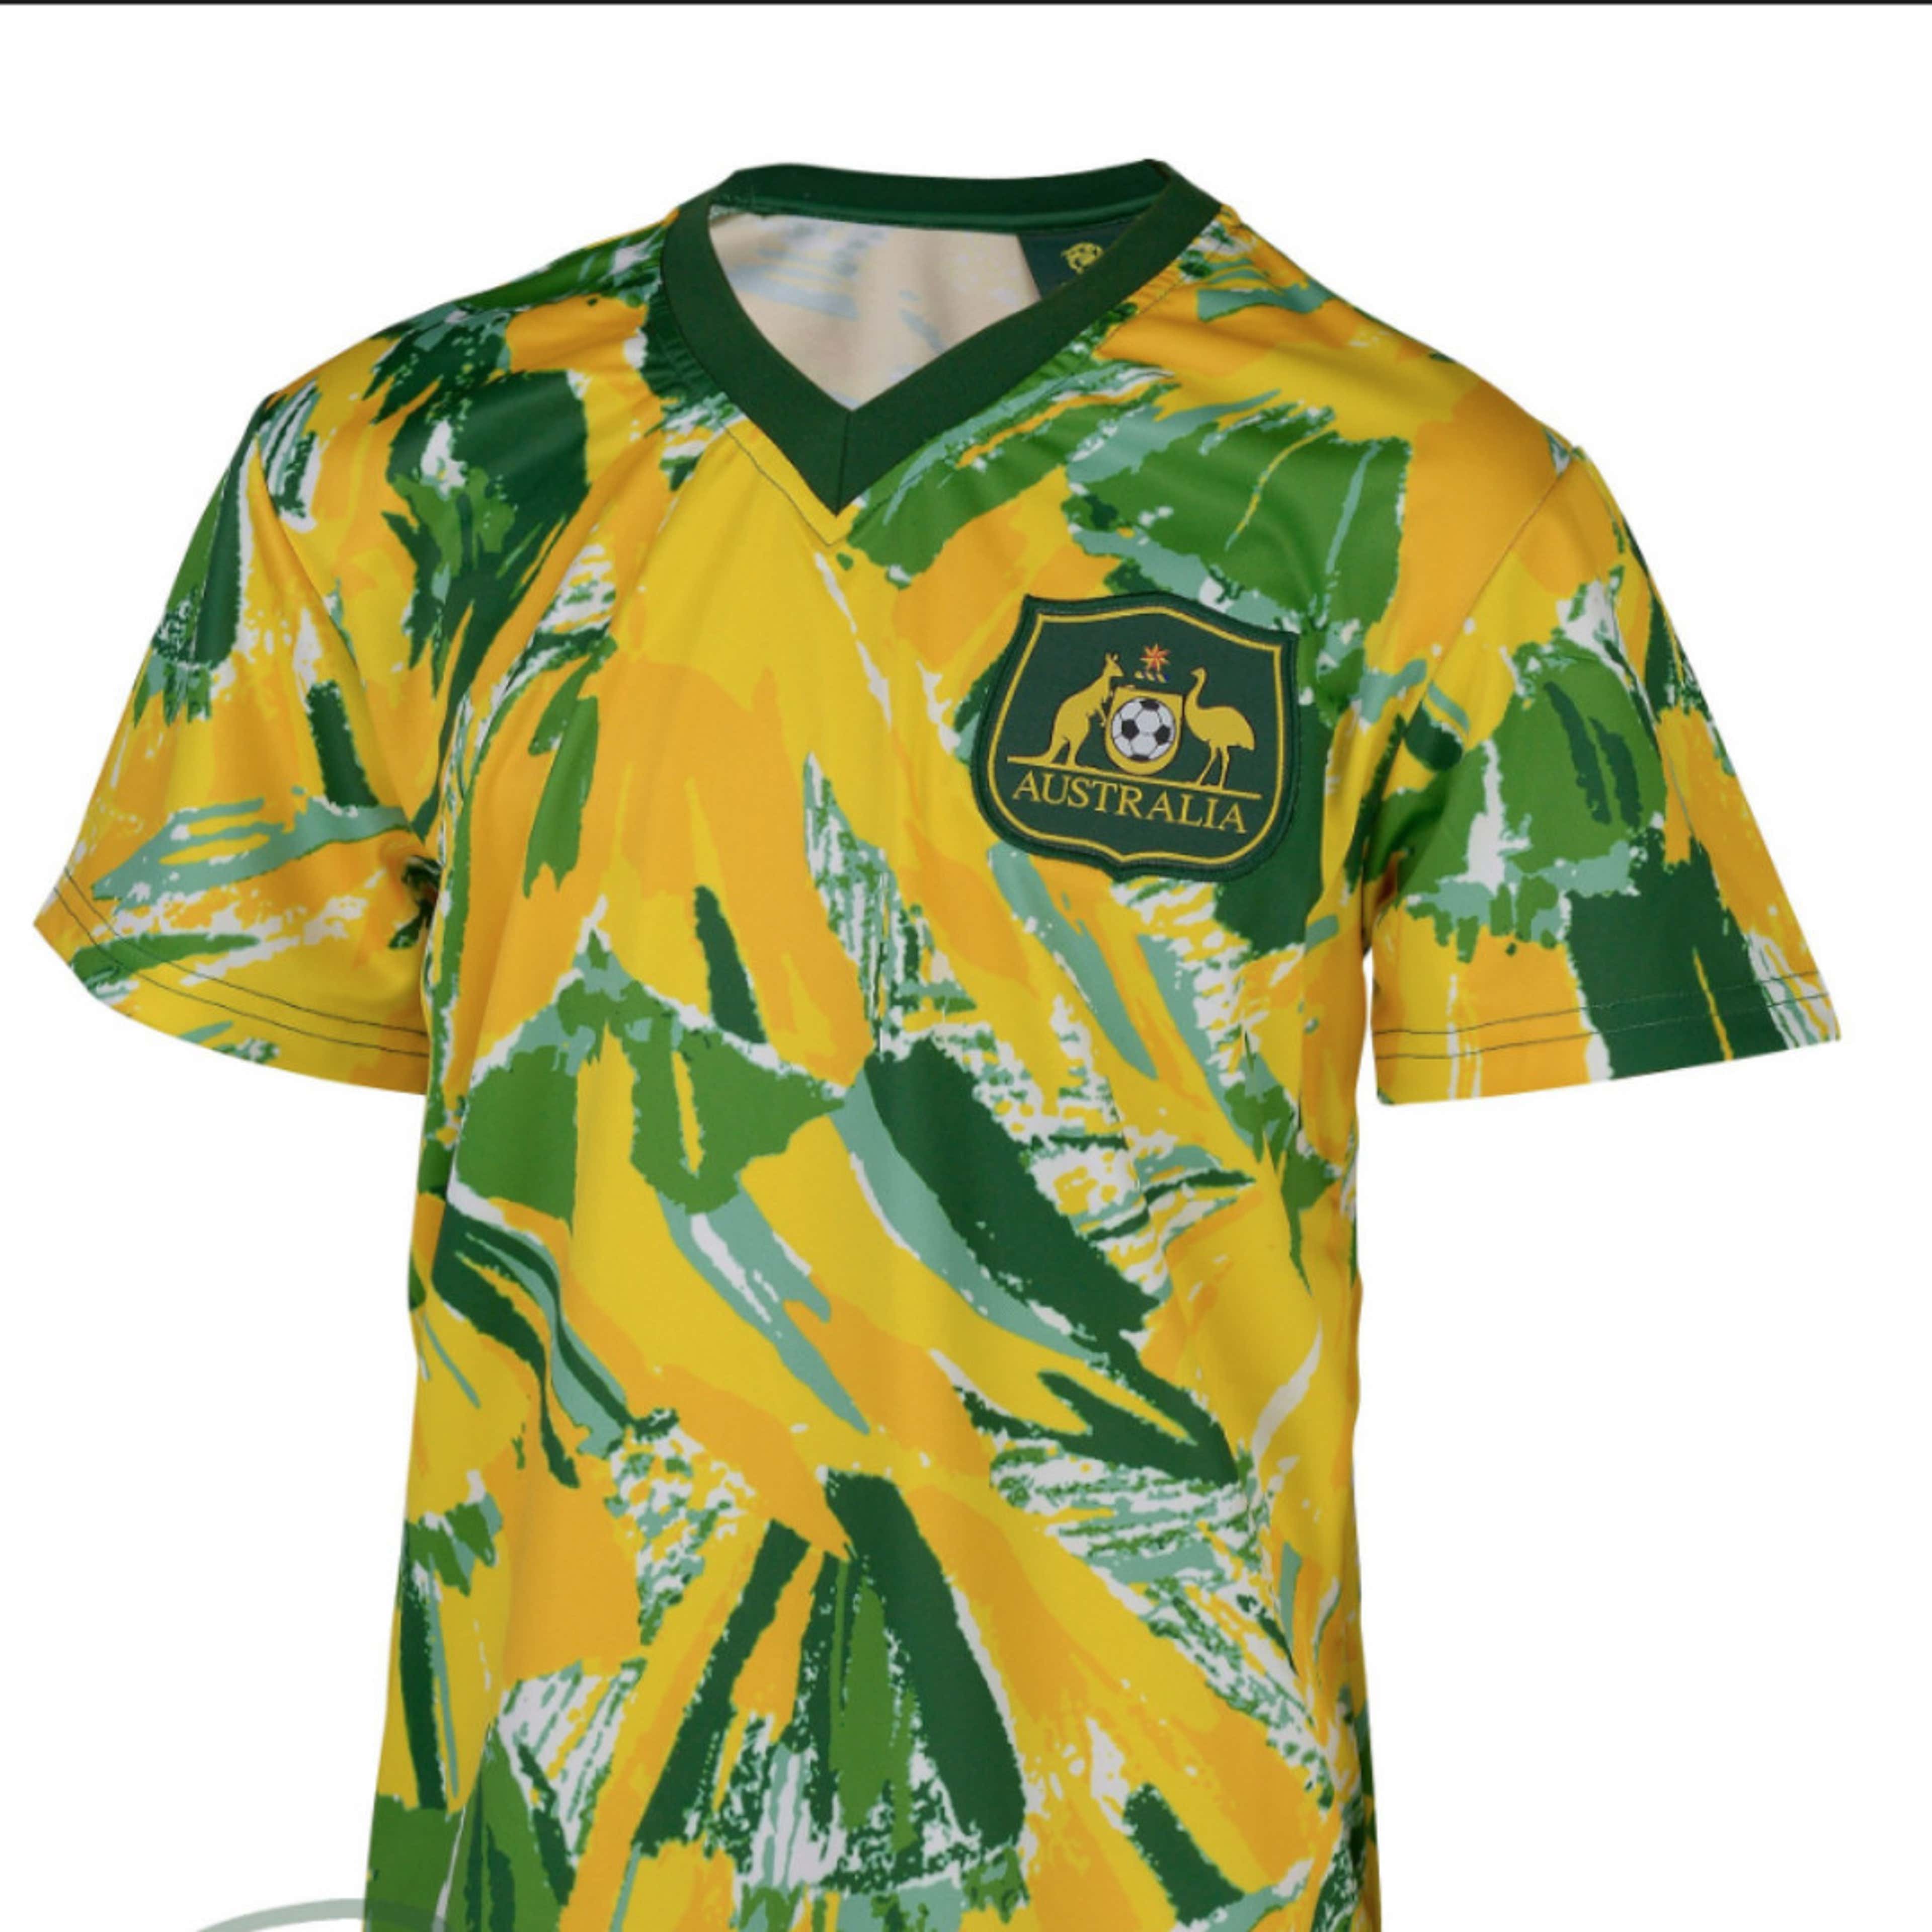 The worst football kits of all time